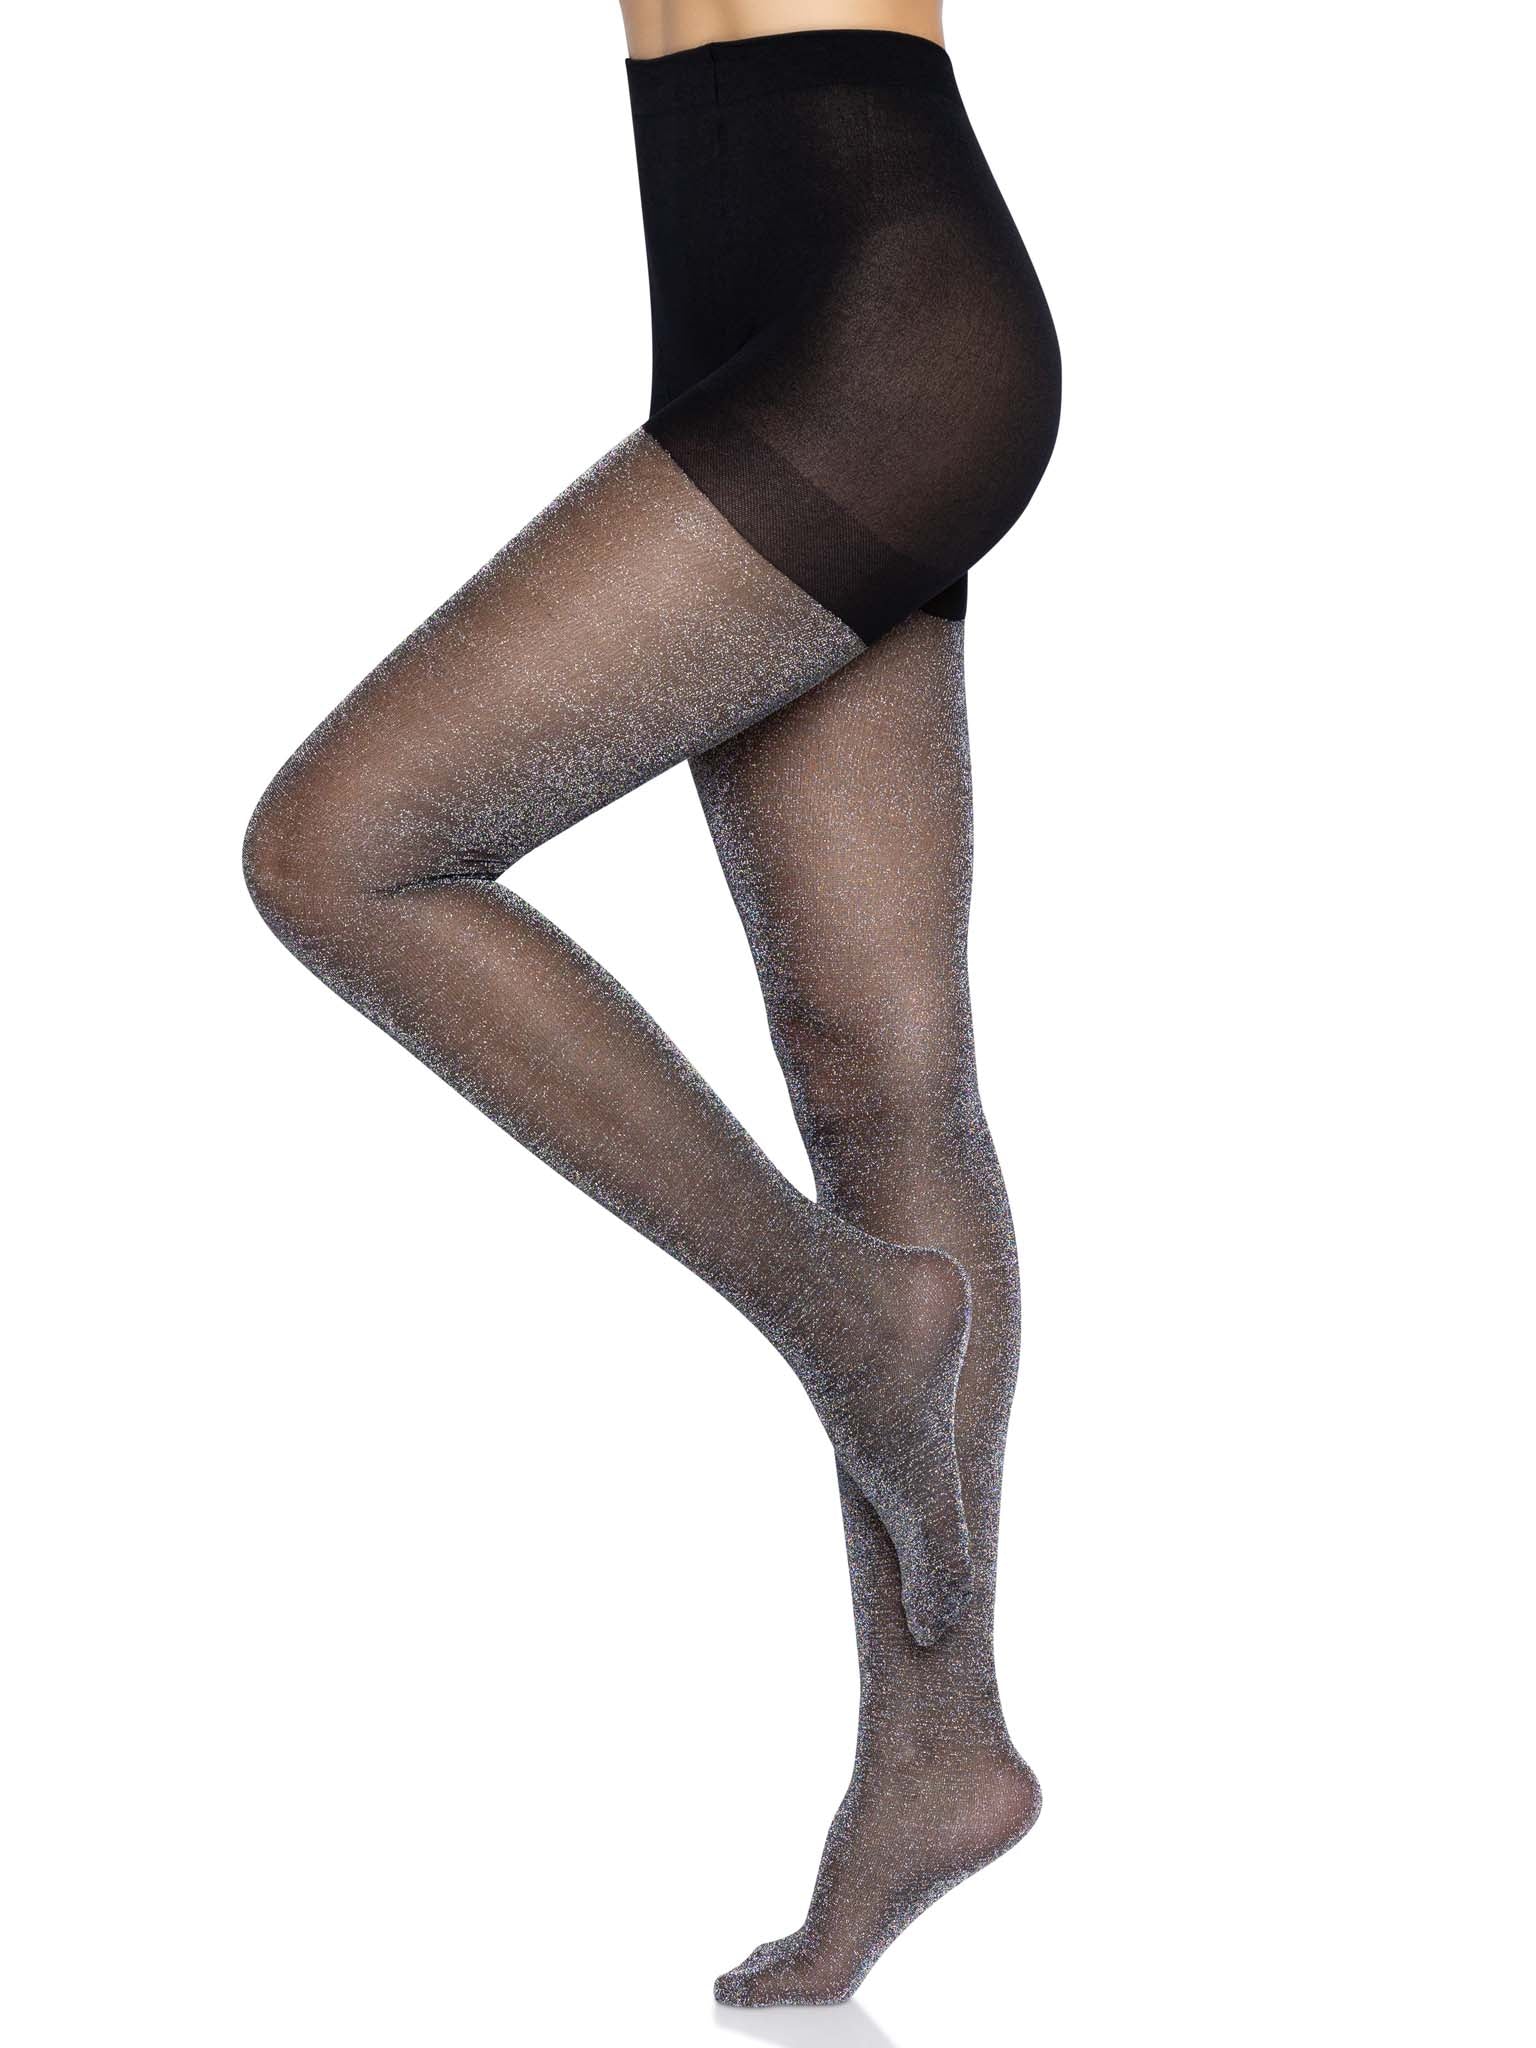 Gold Lurex Shimmer Pantyhose Tights One Size -  Canada